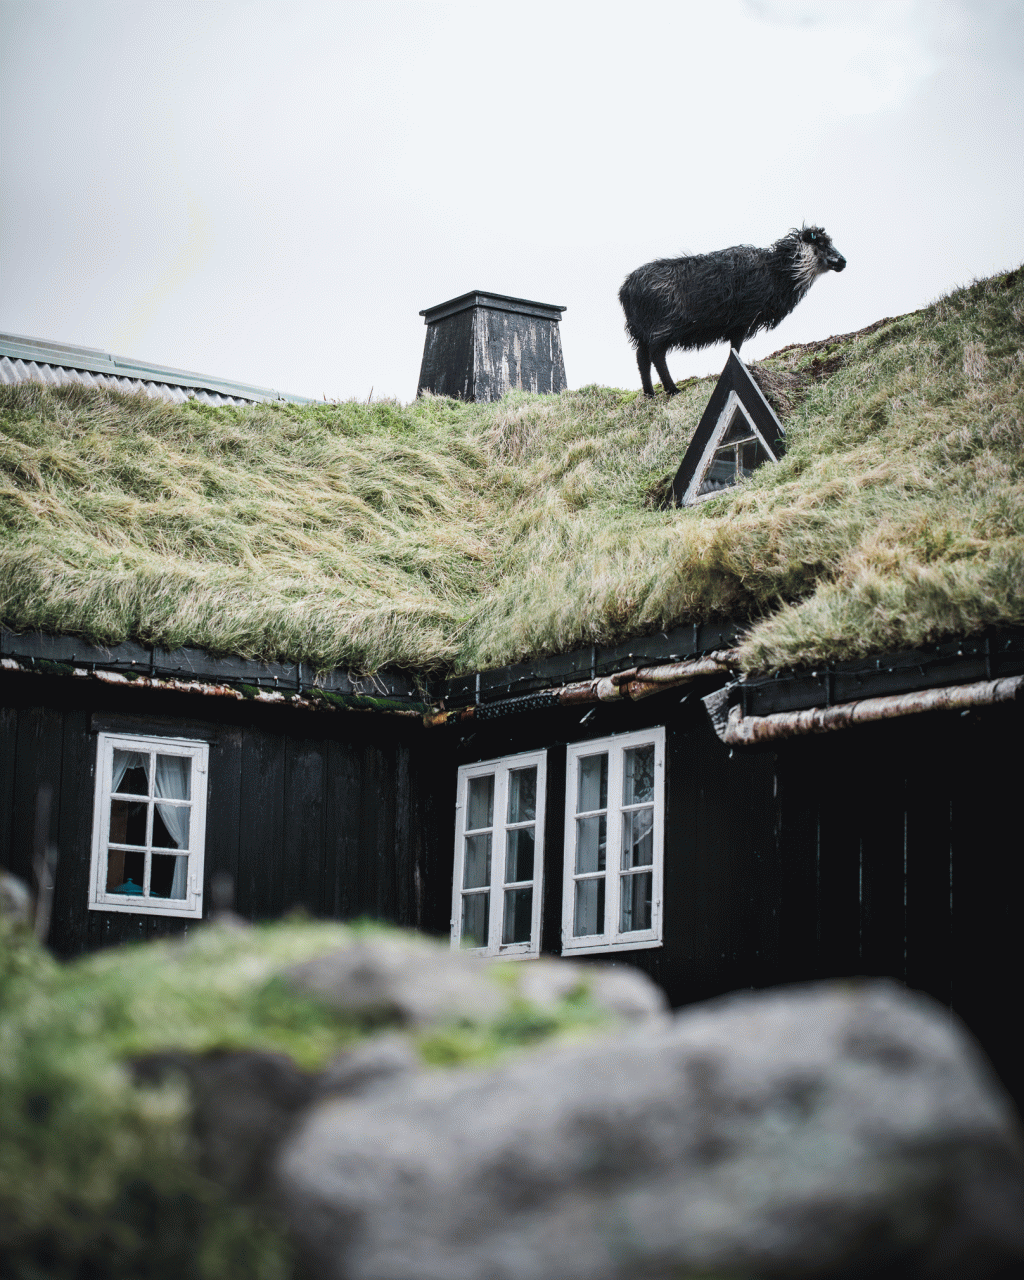 Faroese sheep on a grass roofed house in the Faroe Islands